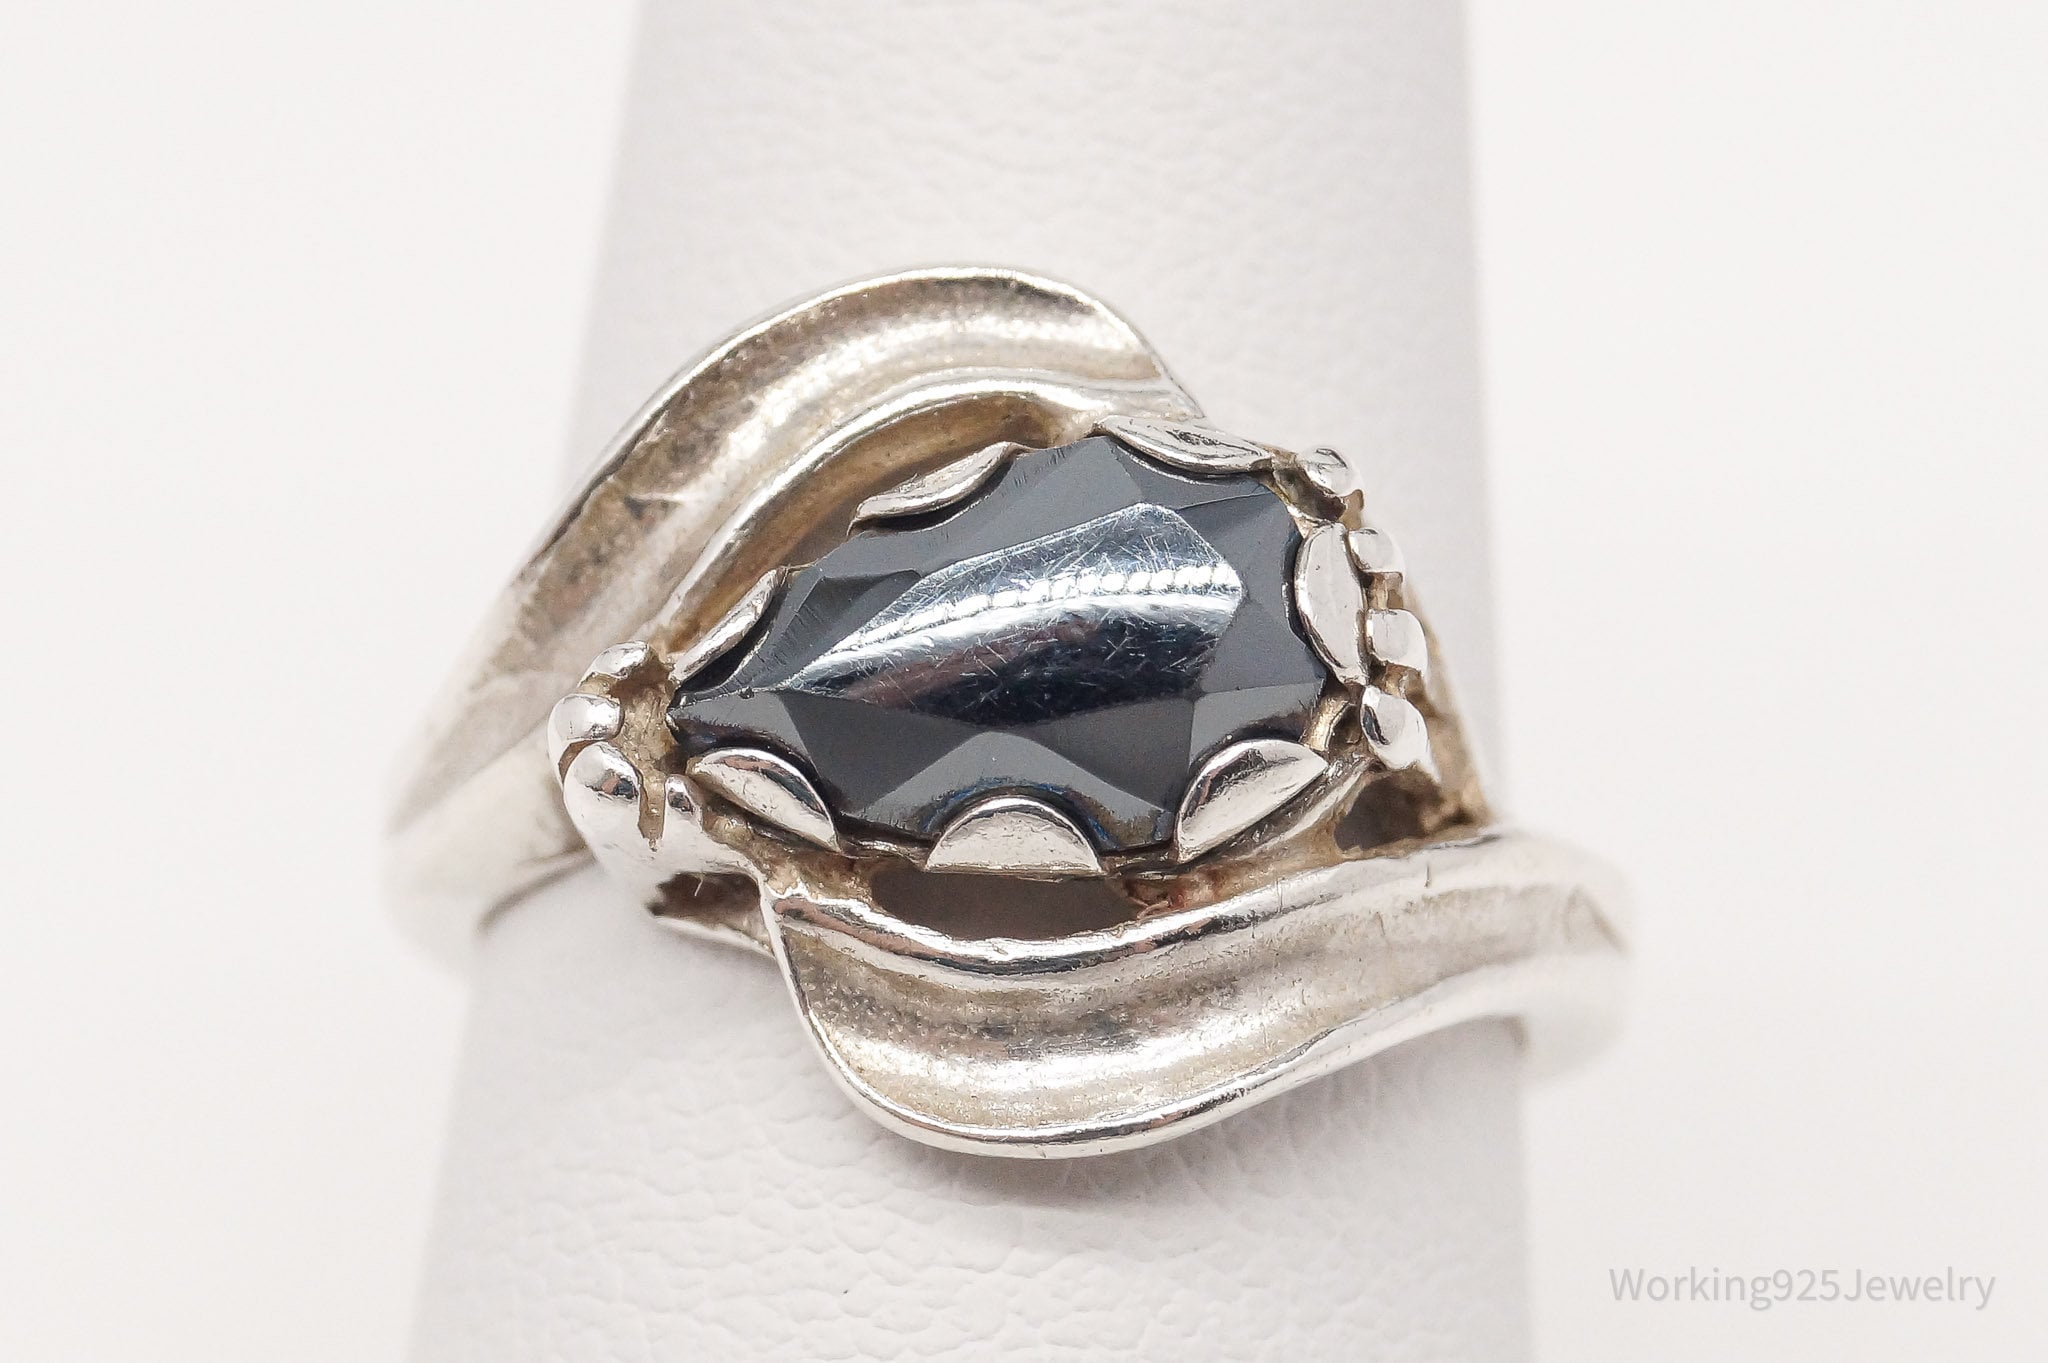 Vintage Mid Century Hematite Sterling Silver Ring - Size 6